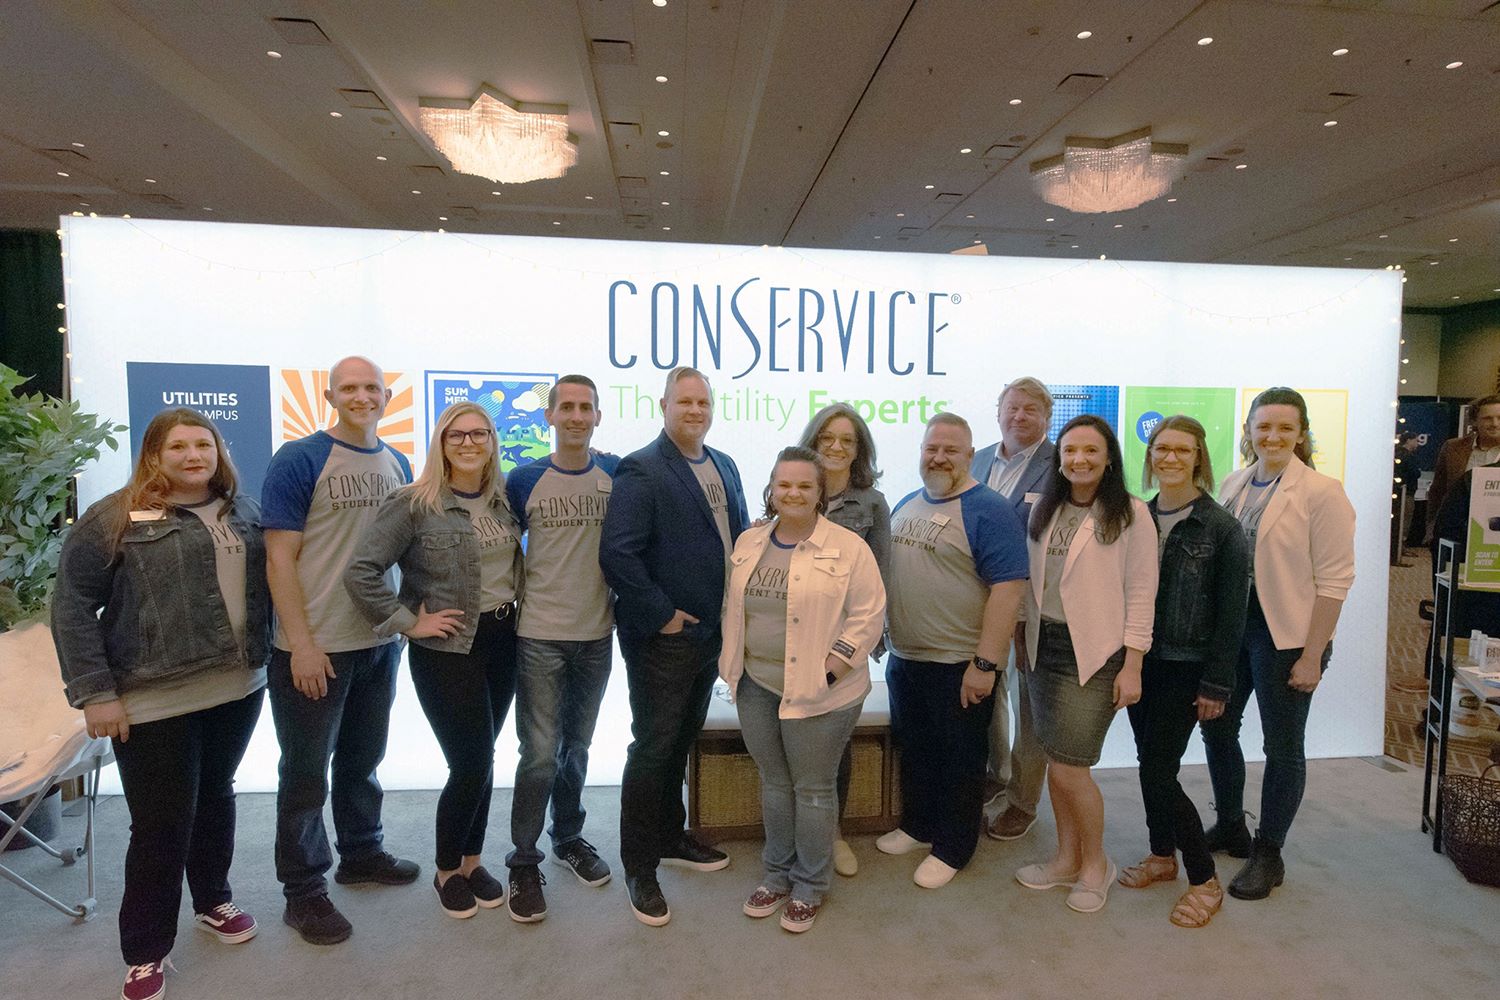 Conservice staff attend workshop in an industry conference